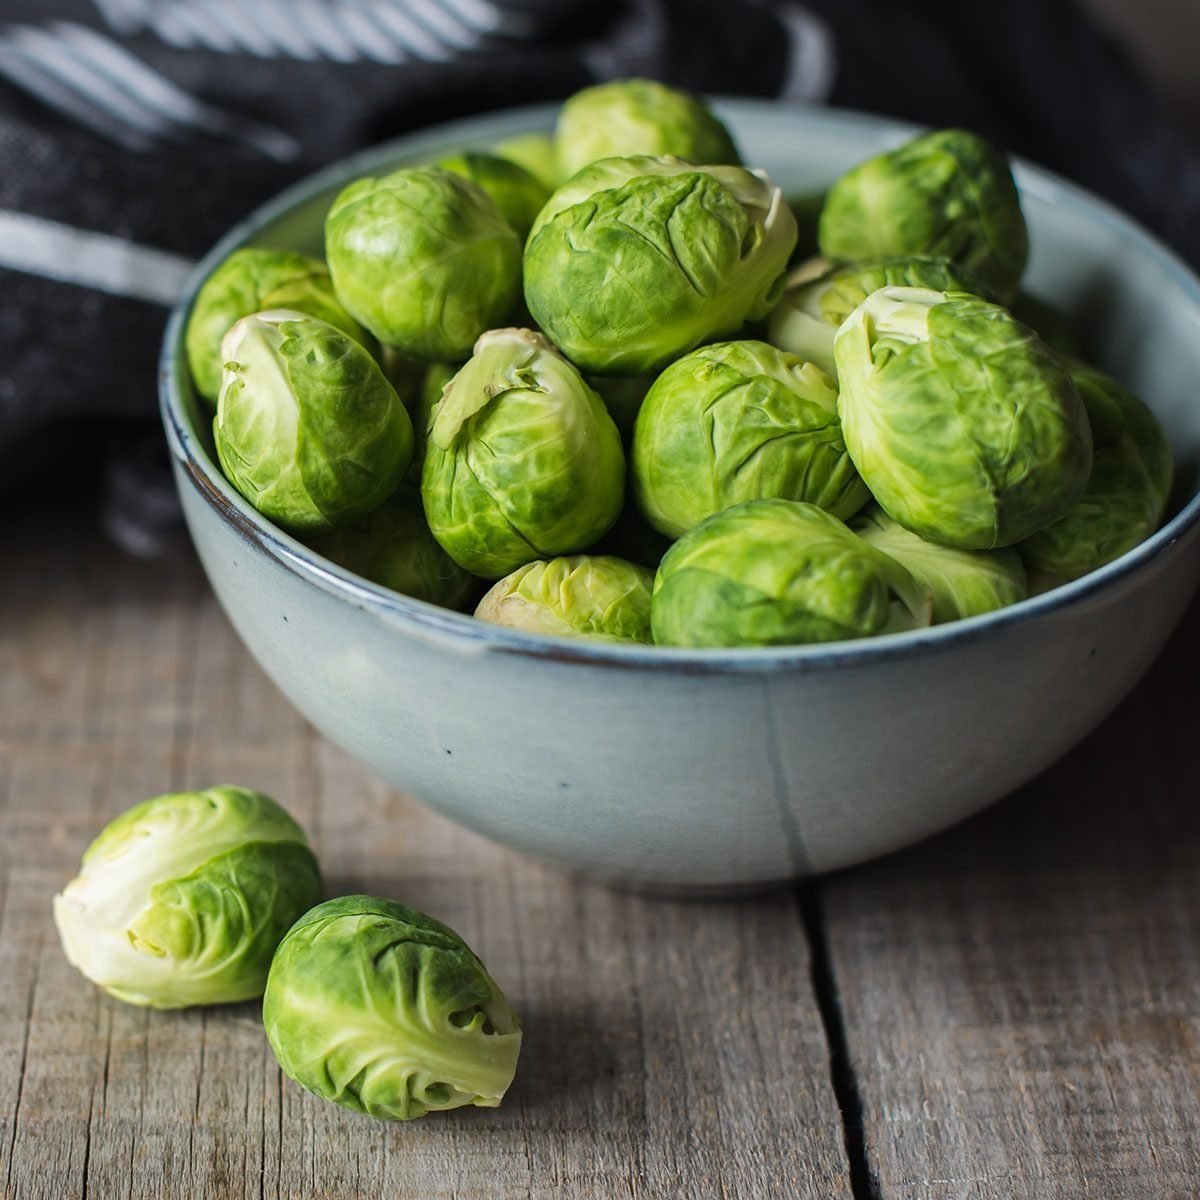 Bowl of Brussels sprouts and napkin on a rustic wooden table.